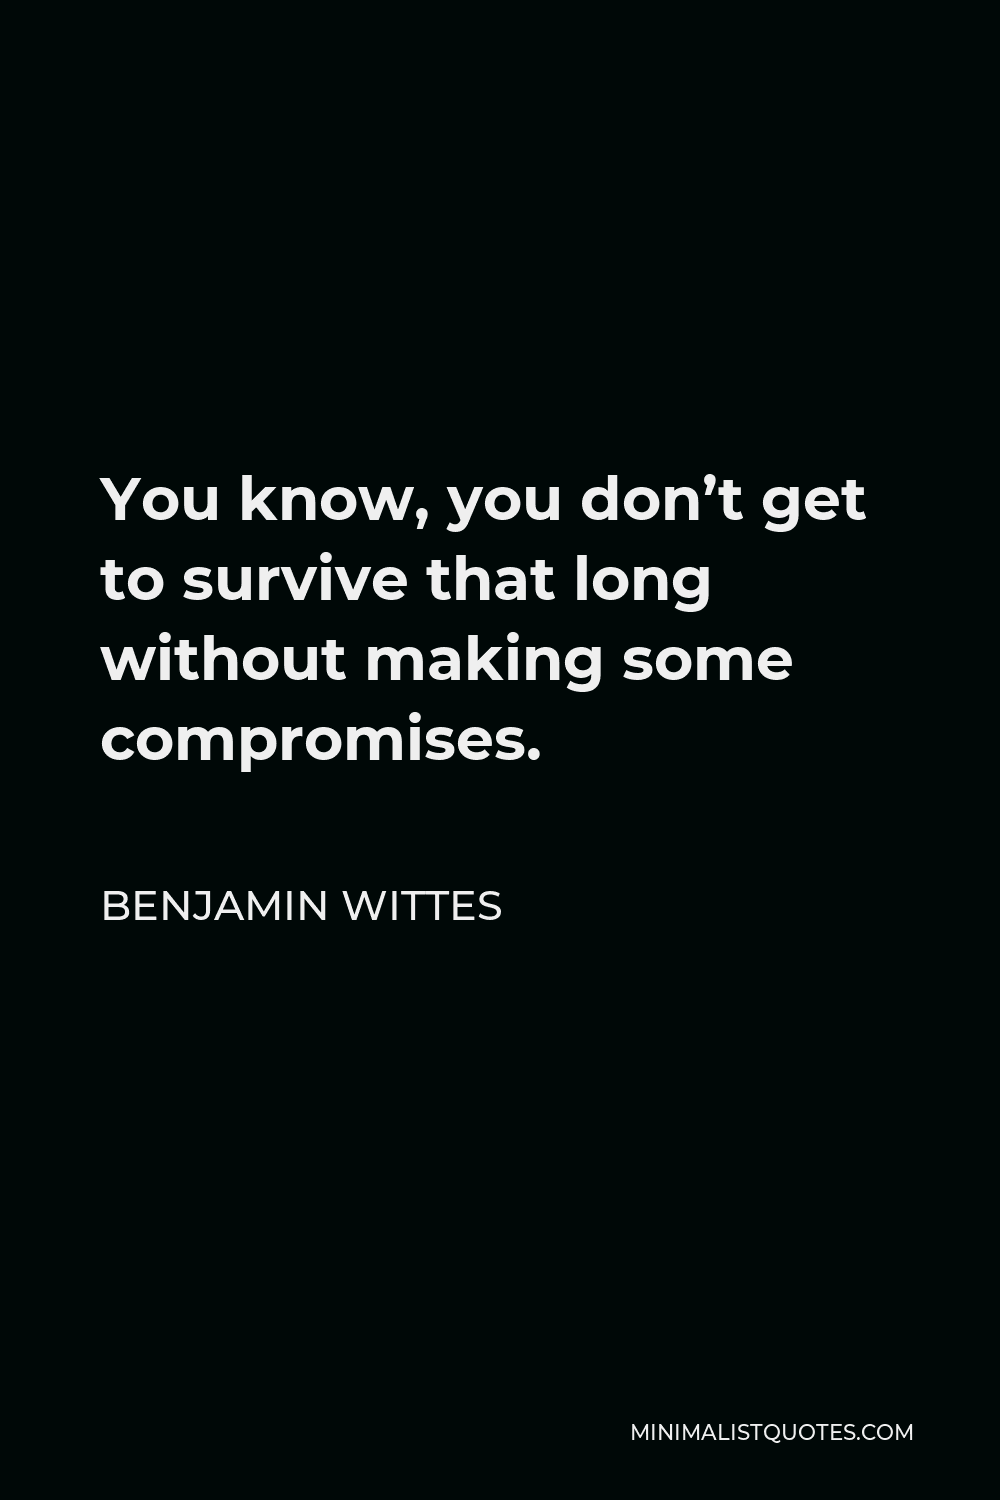 Benjamin Wittes Quote - You know, you don’t get to survive that long without making some compromises.